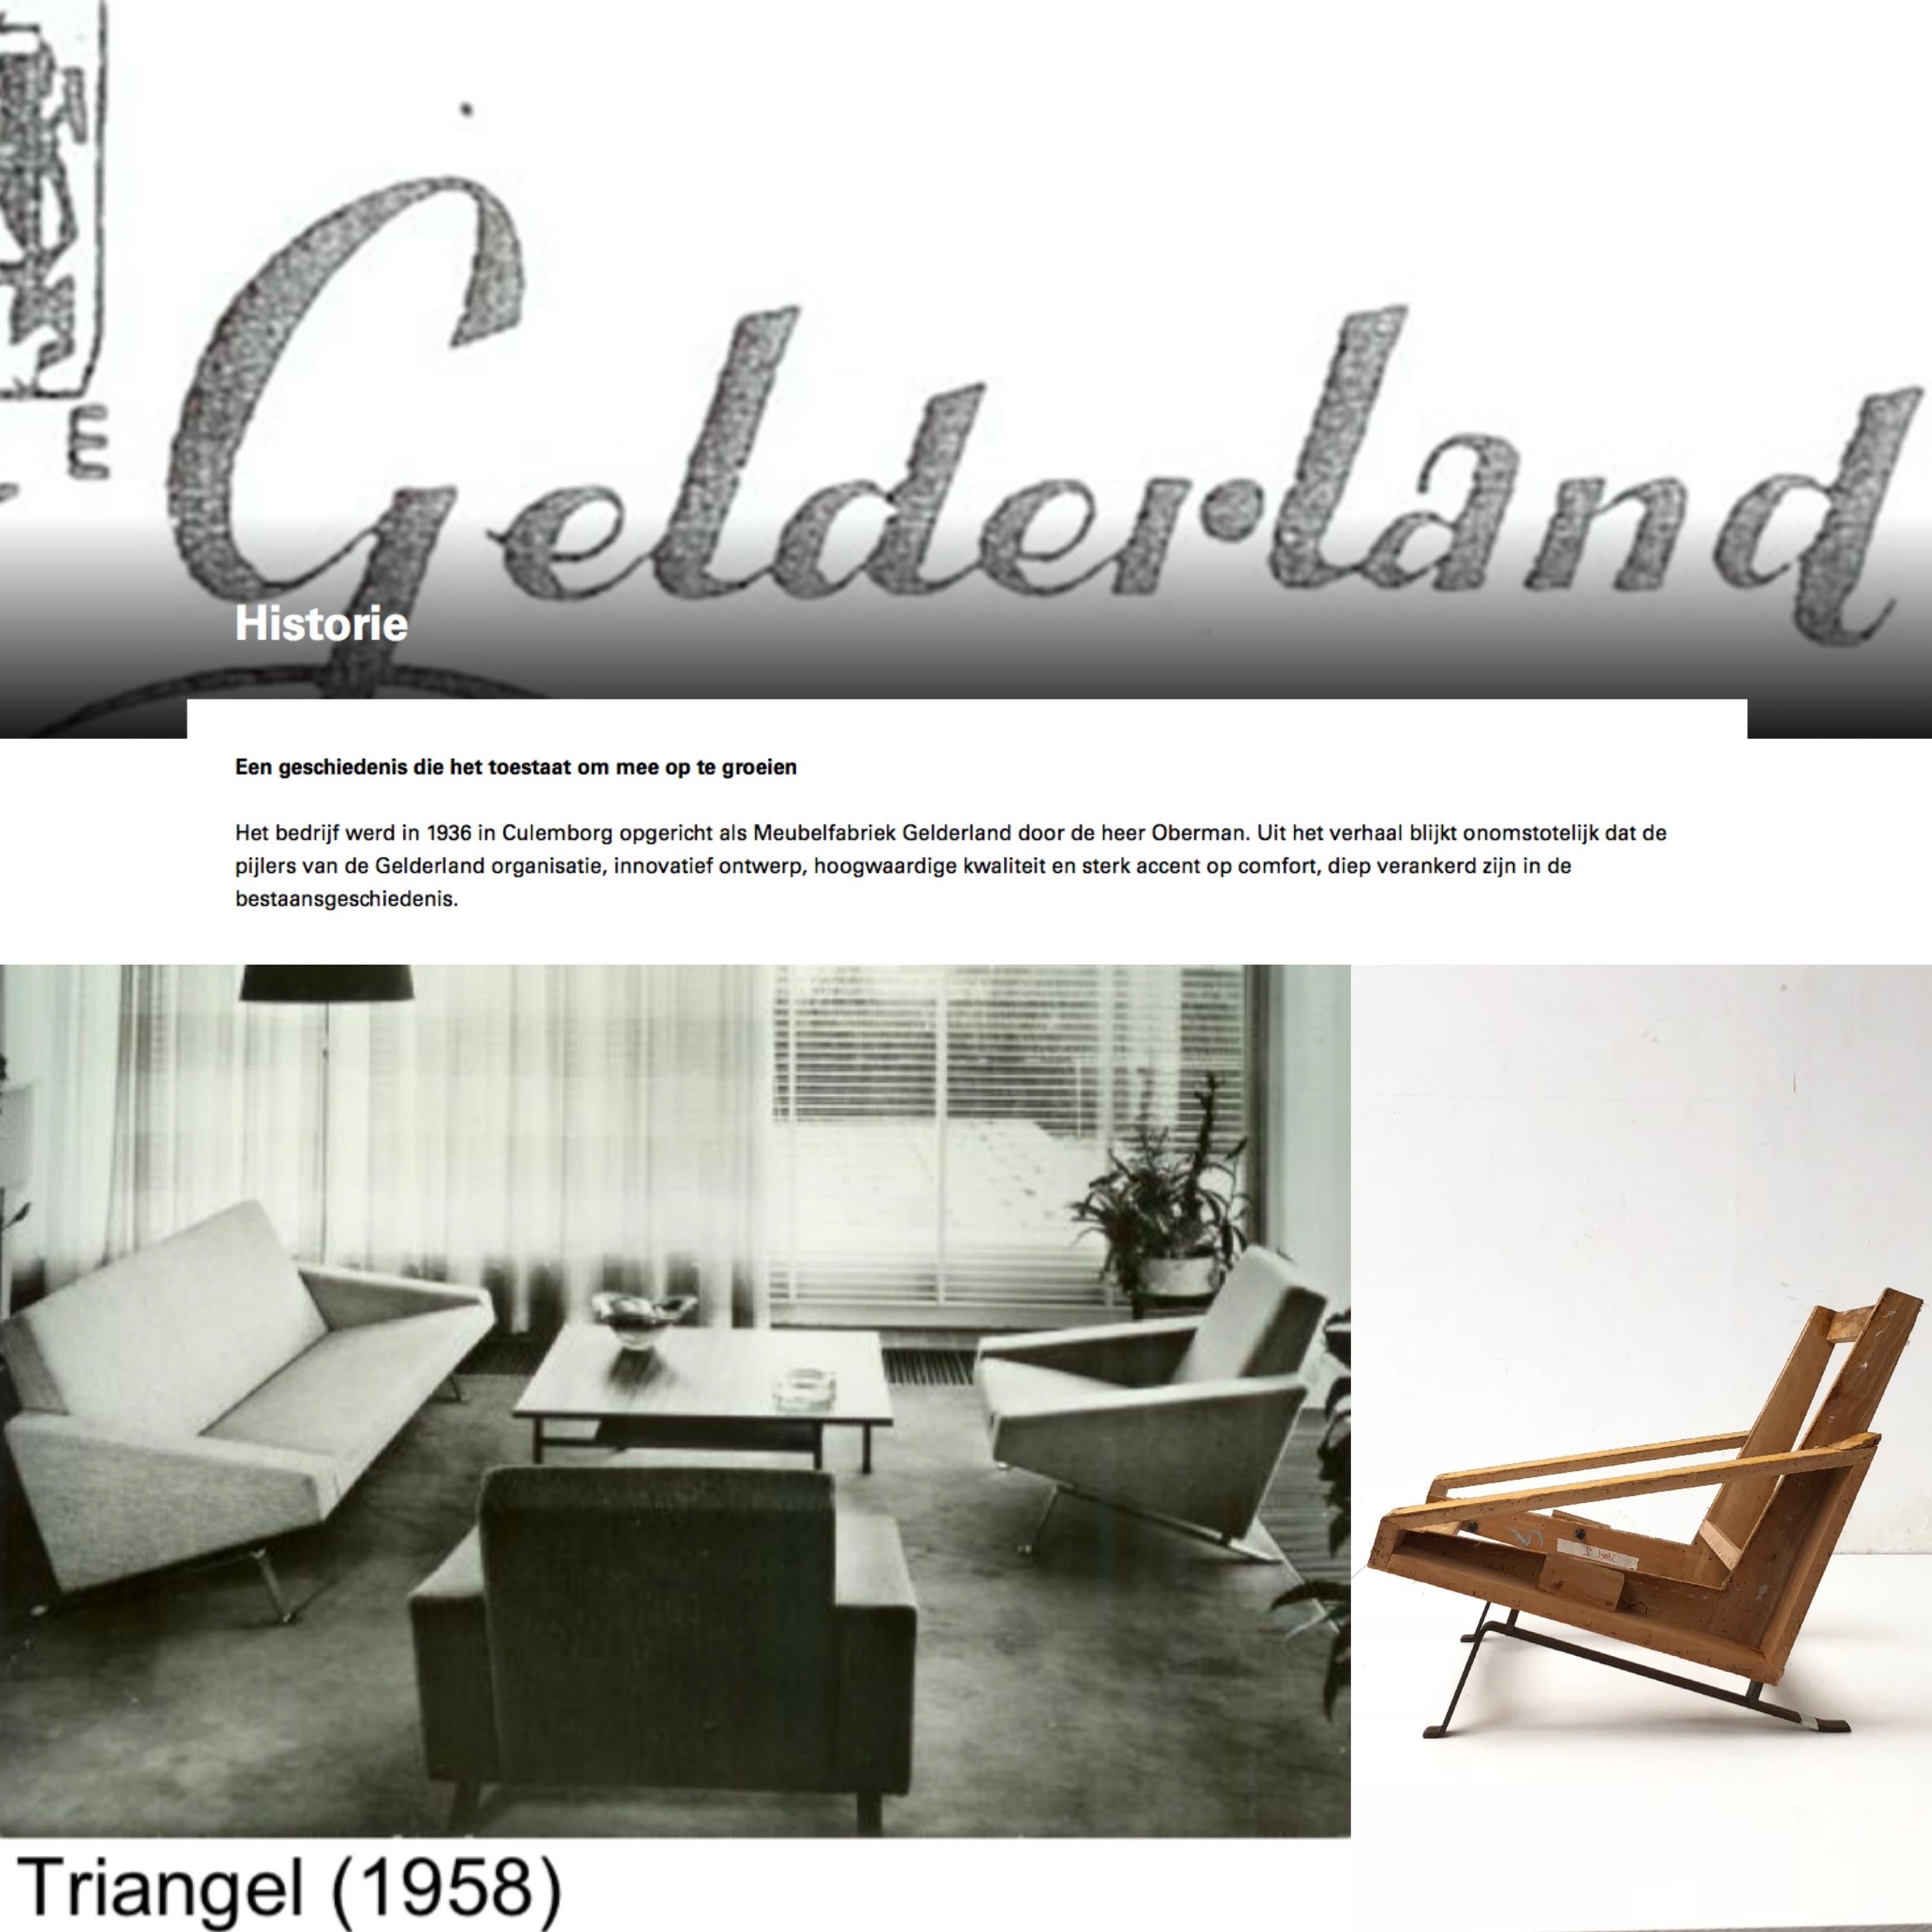 This very rare Triangel set was produced by Dutch high end furniture manufacturer Gelderland (founded in 1938) by Oberman
1958 (the year this Triangel model was introduced) was the year that modernism boomed in Europe, the 1958 World Expo in